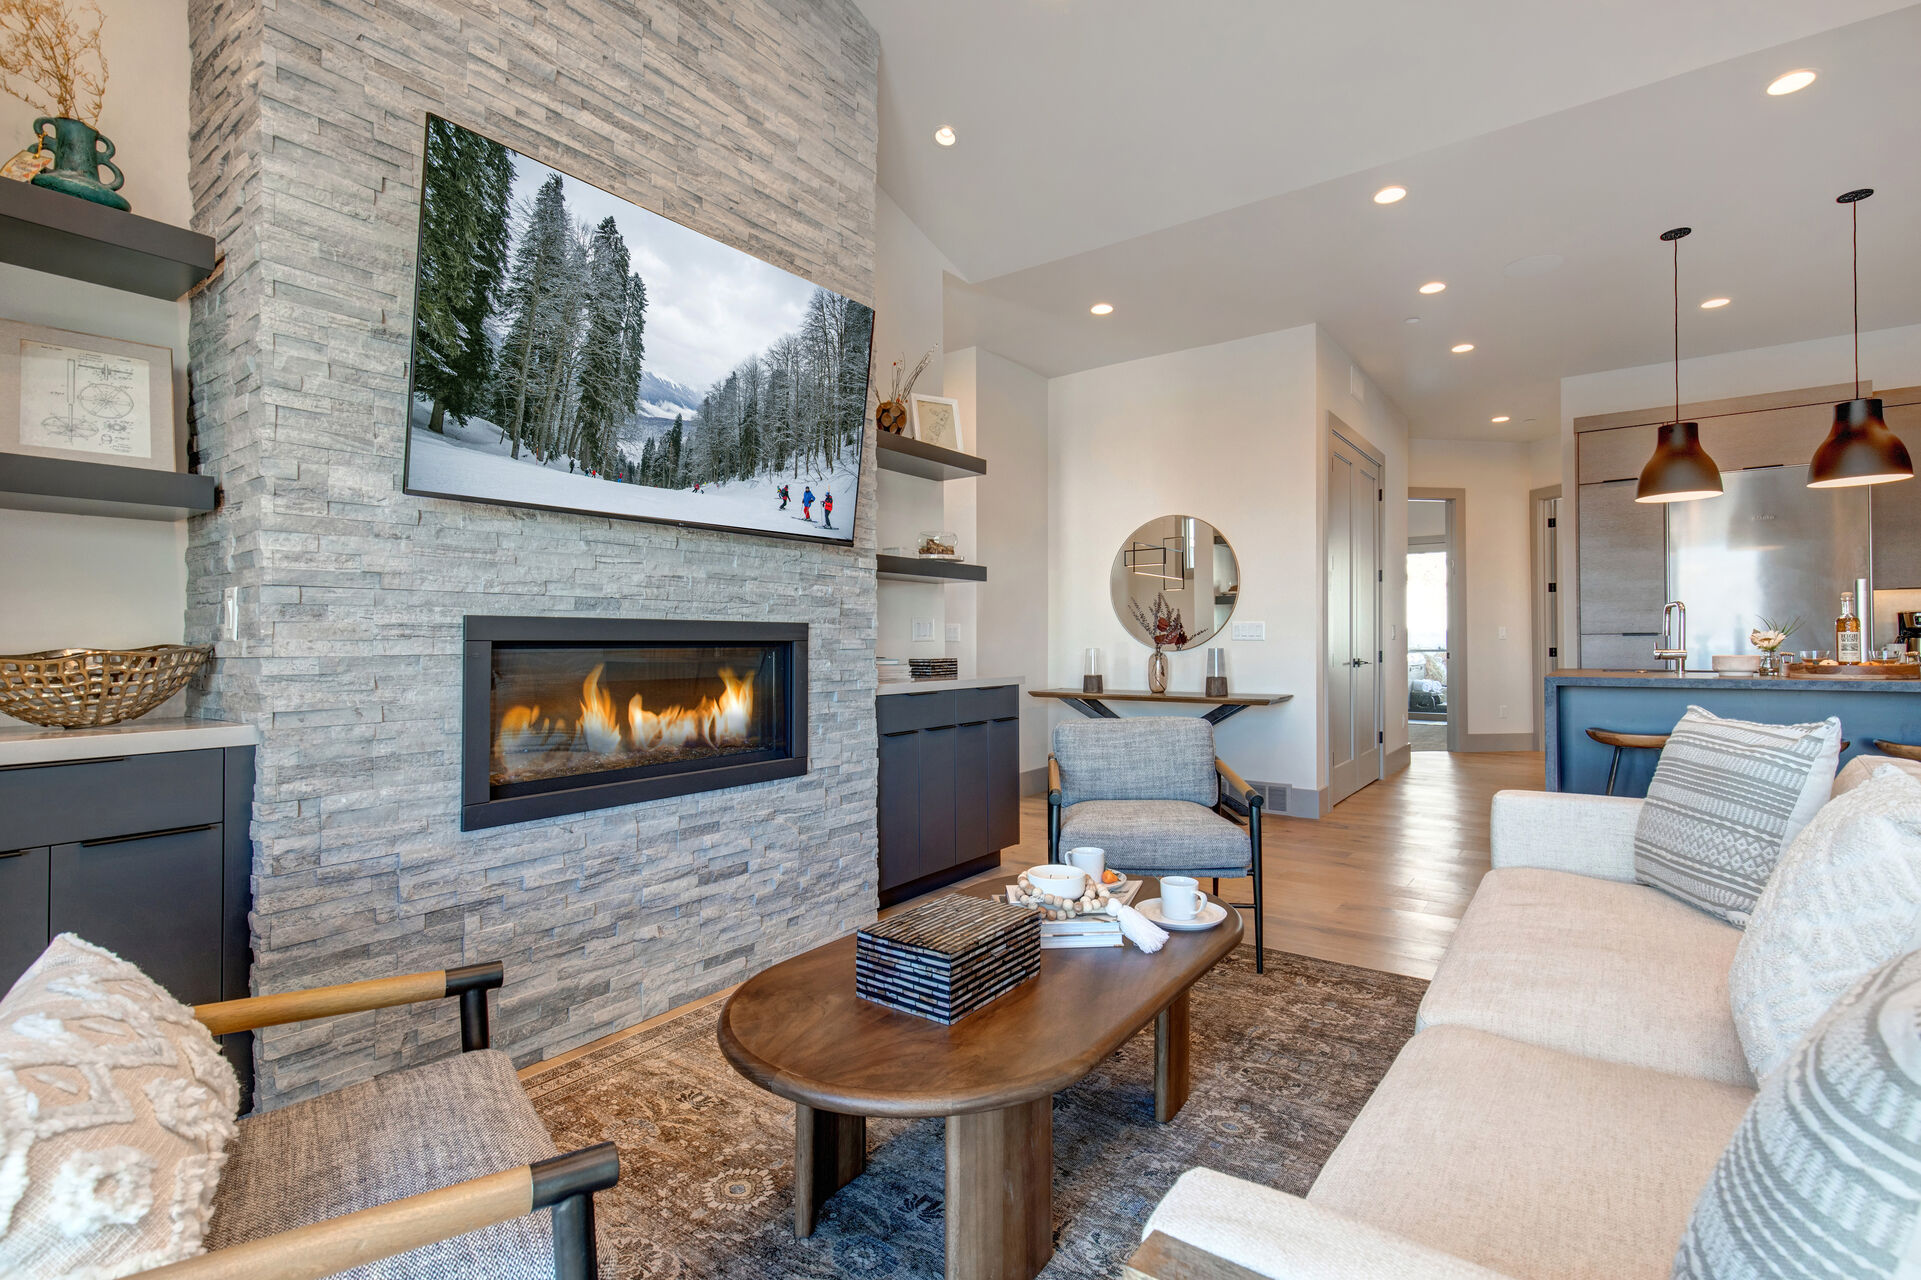 Main Level Living Room with a Gas Fireplace and Smart TV